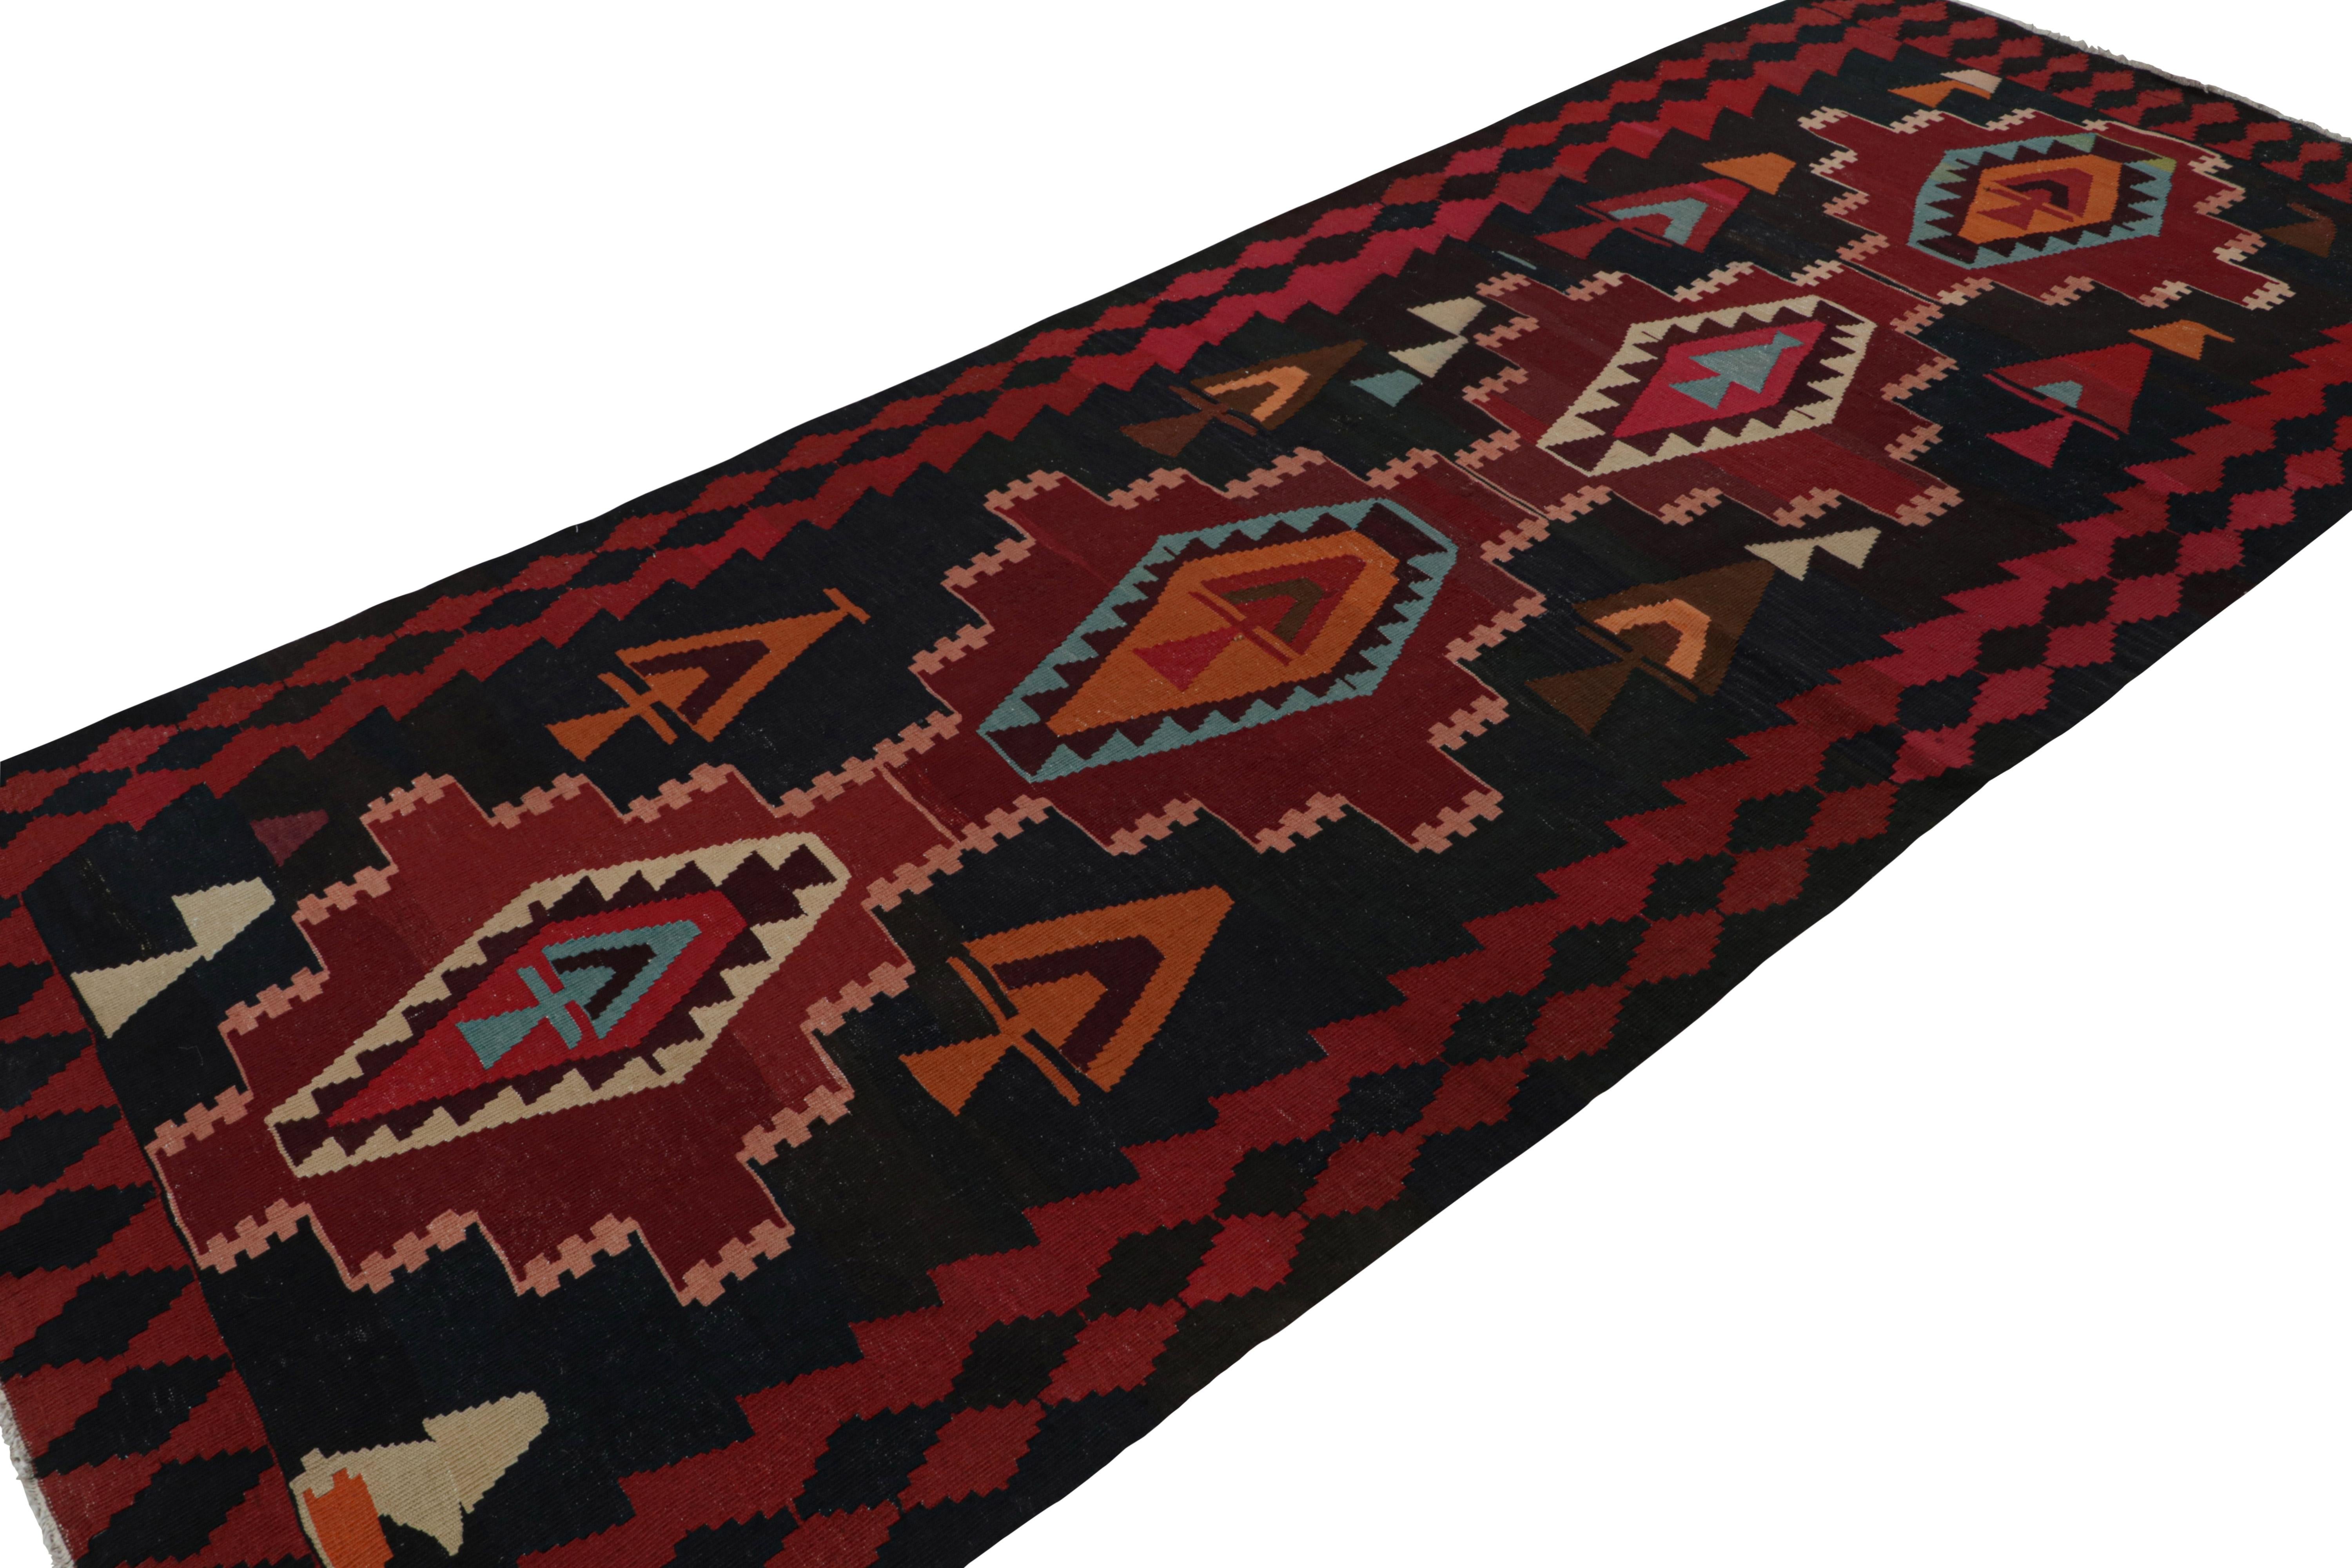 This vintage 5x12 Persian Kilim is the latest to join our Kilim & Flatweave collection. 

On the Design:

Handwoven in wool circa 1950-1960, the piece carries red medallions on a blue field. The gorgeous tribal piece is fabulously unique in its